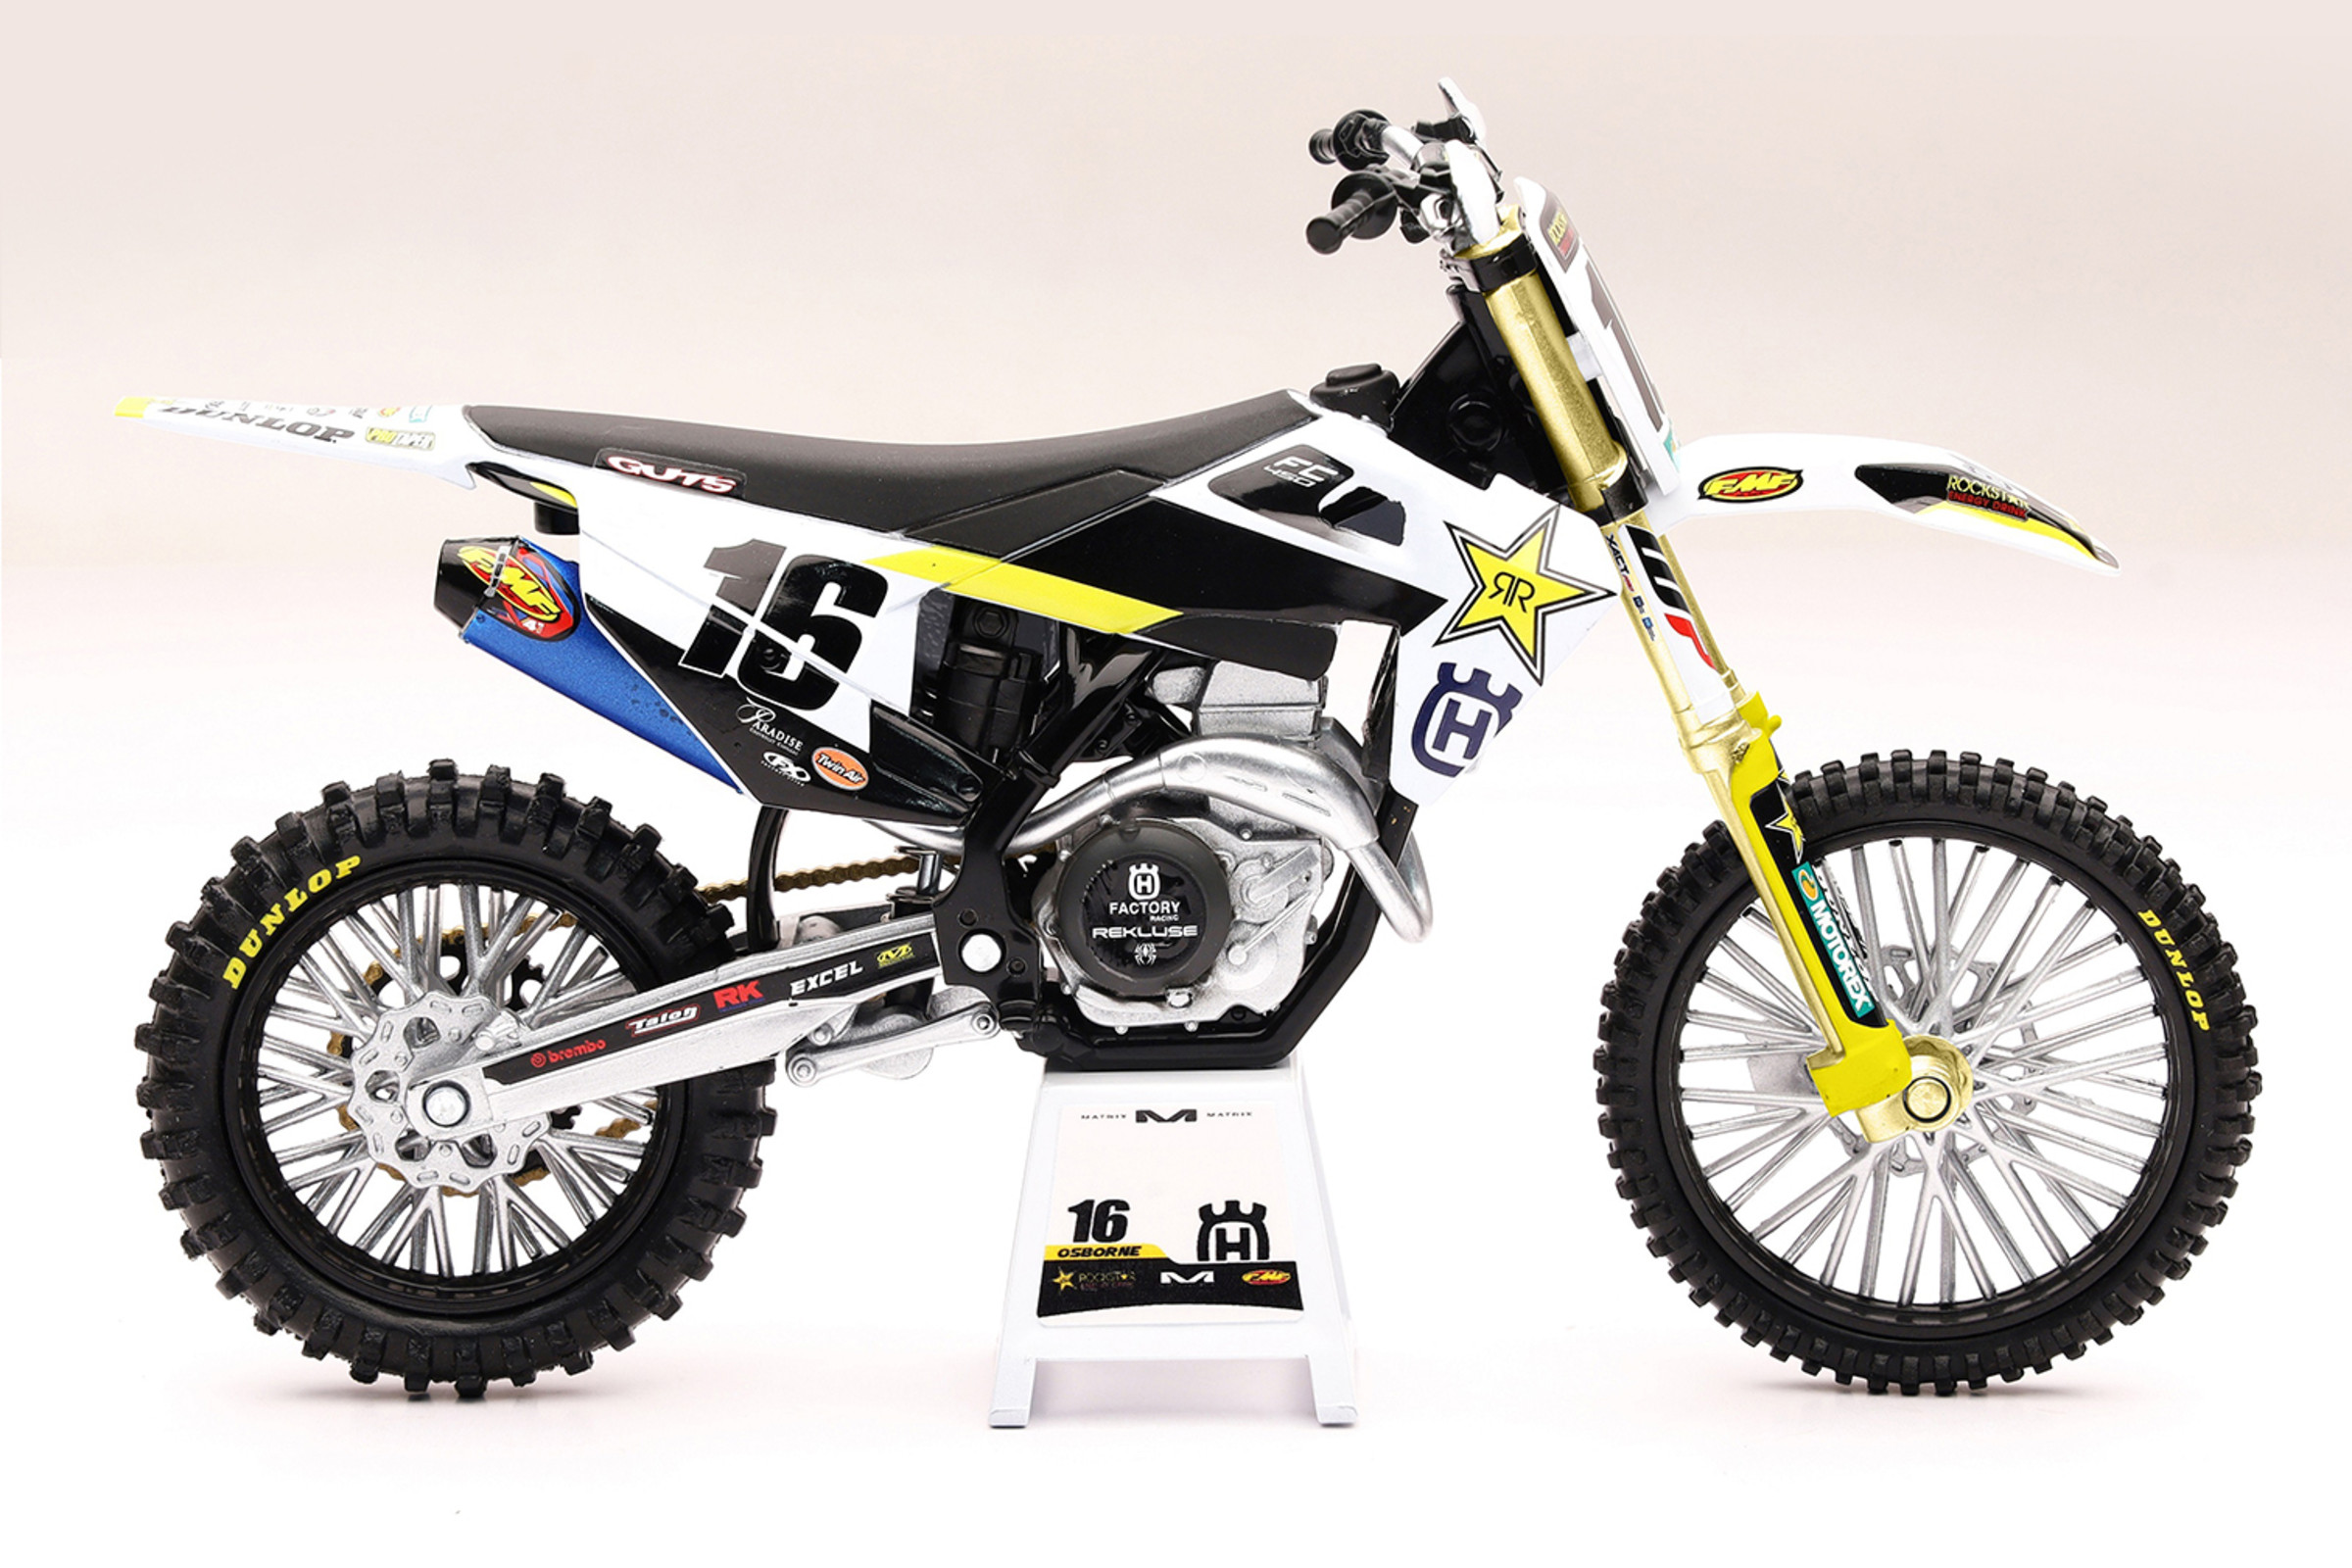 Factory Replica Bikes are Now Available from New Ray Toys - Racer X